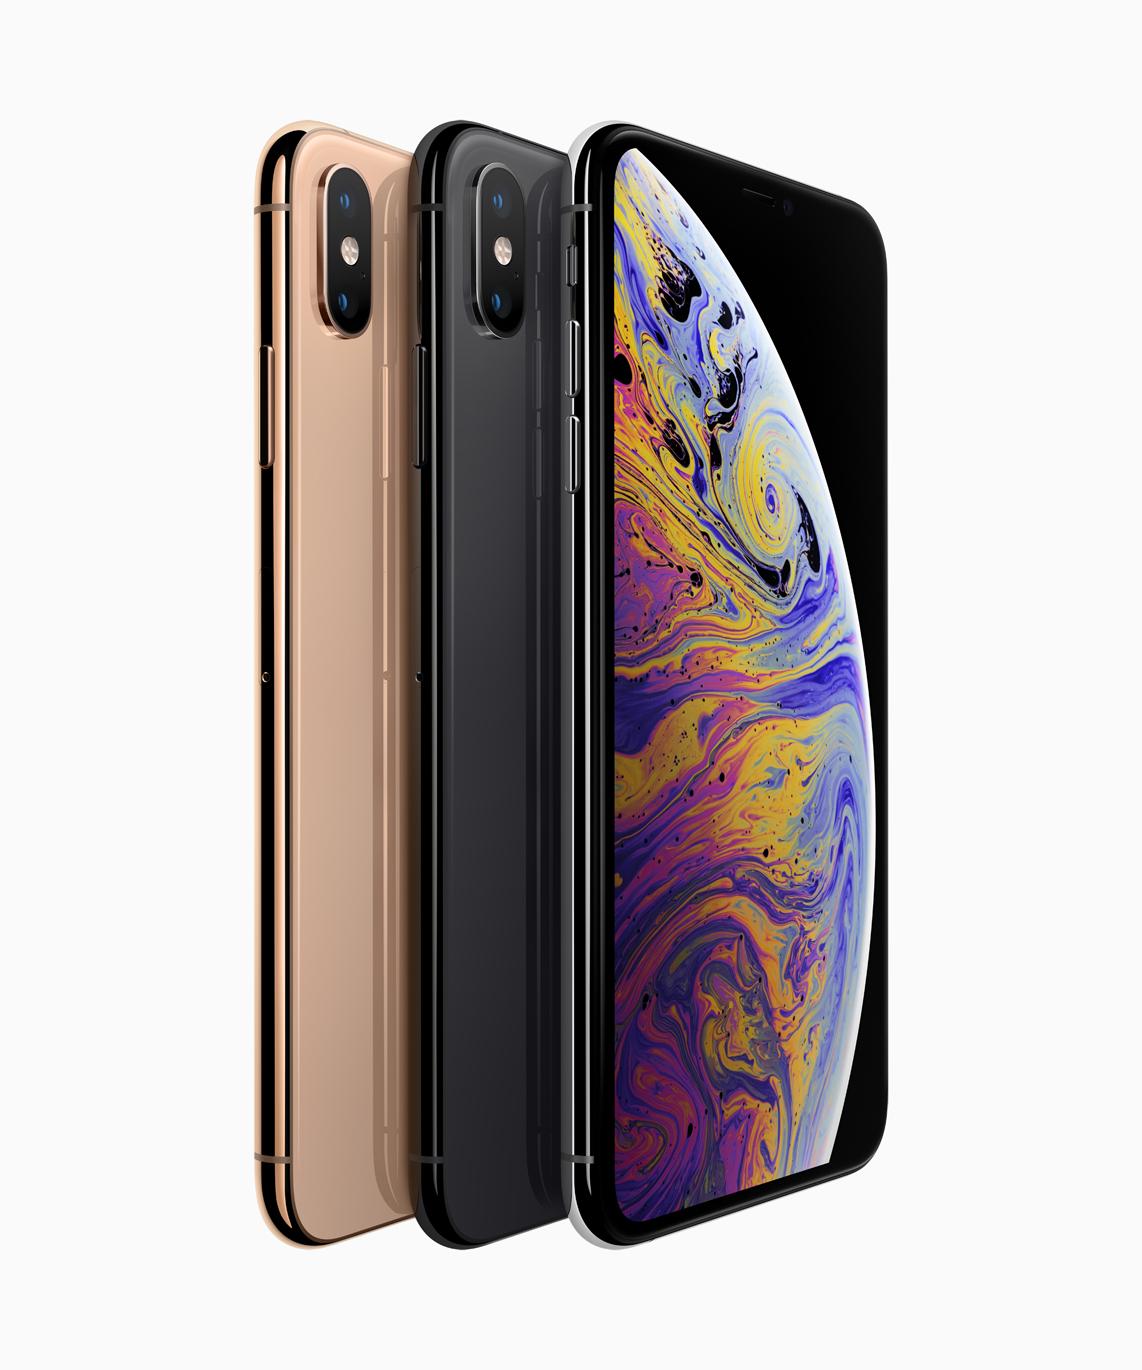 iPhone Xs i iPhone Xs Max class="wp-image-803128" title="Oto nowy iPhone Xs i iPhone Xs Max" 